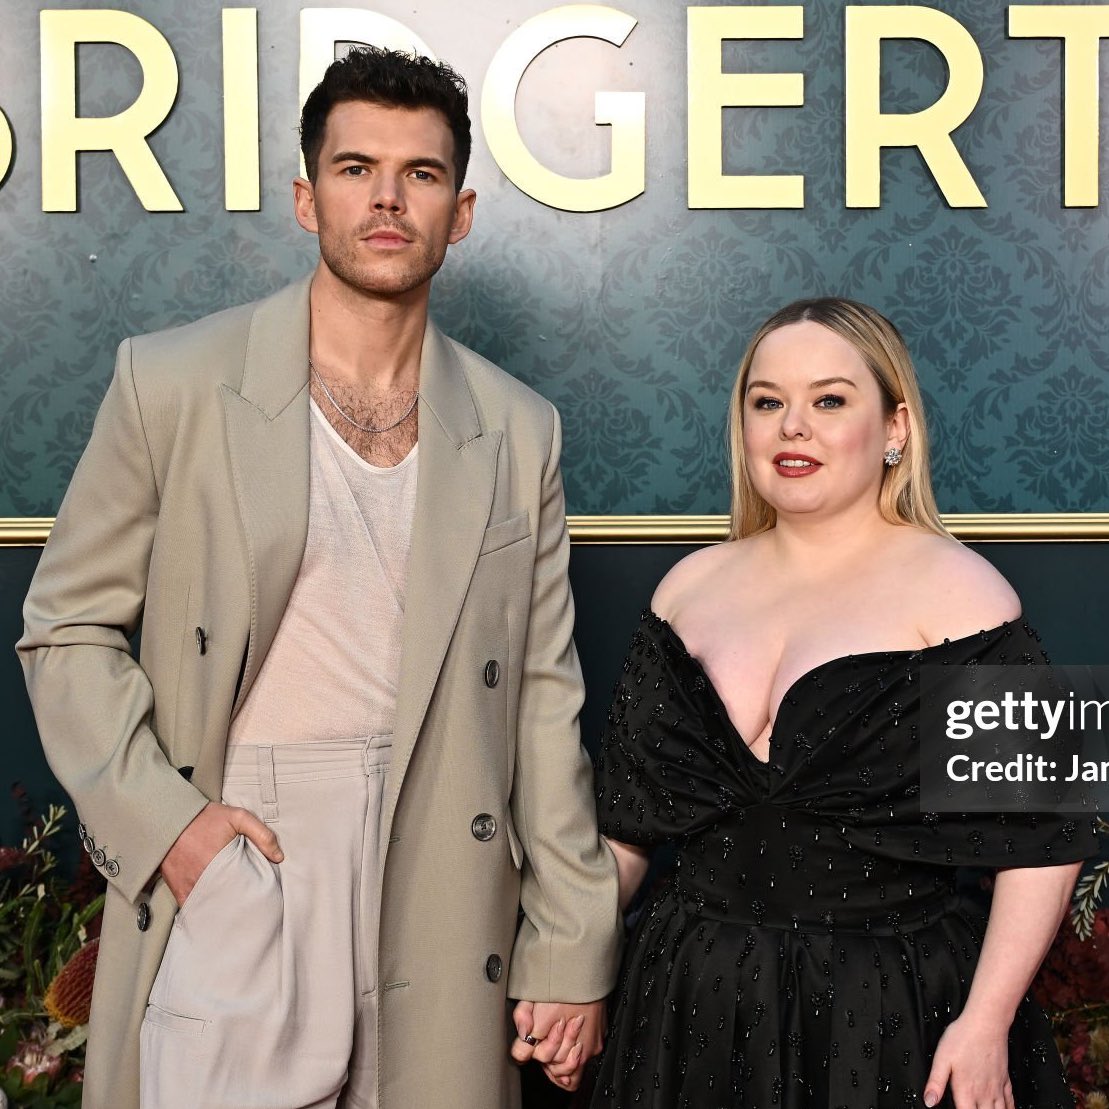 I generally do not ship them. BUT THEY ARE MAKING IT DIFFICULT FOR ME. THE HANDS! ARE YOU KIDDING ME? 

#BridgertonS3 #polin #lukenewton #nicolacoughlan